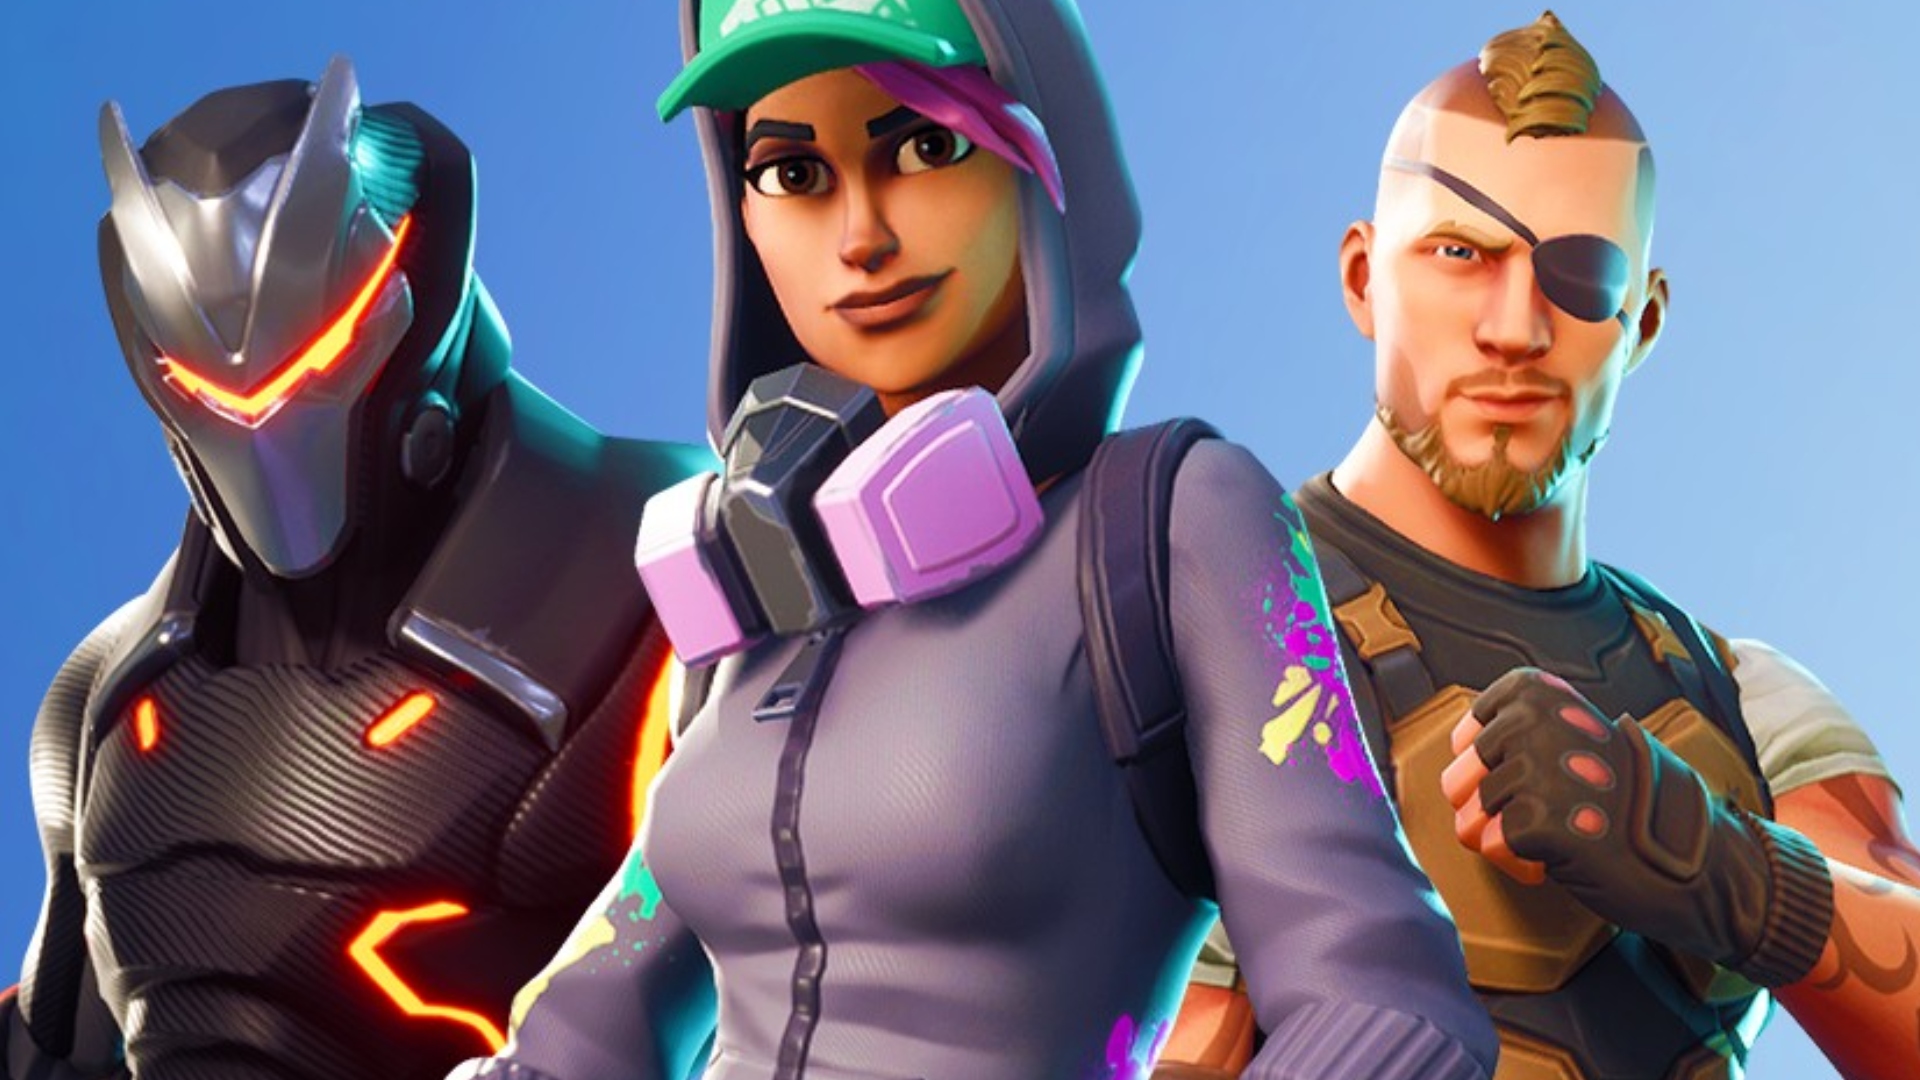 Epic Games warns developers to 